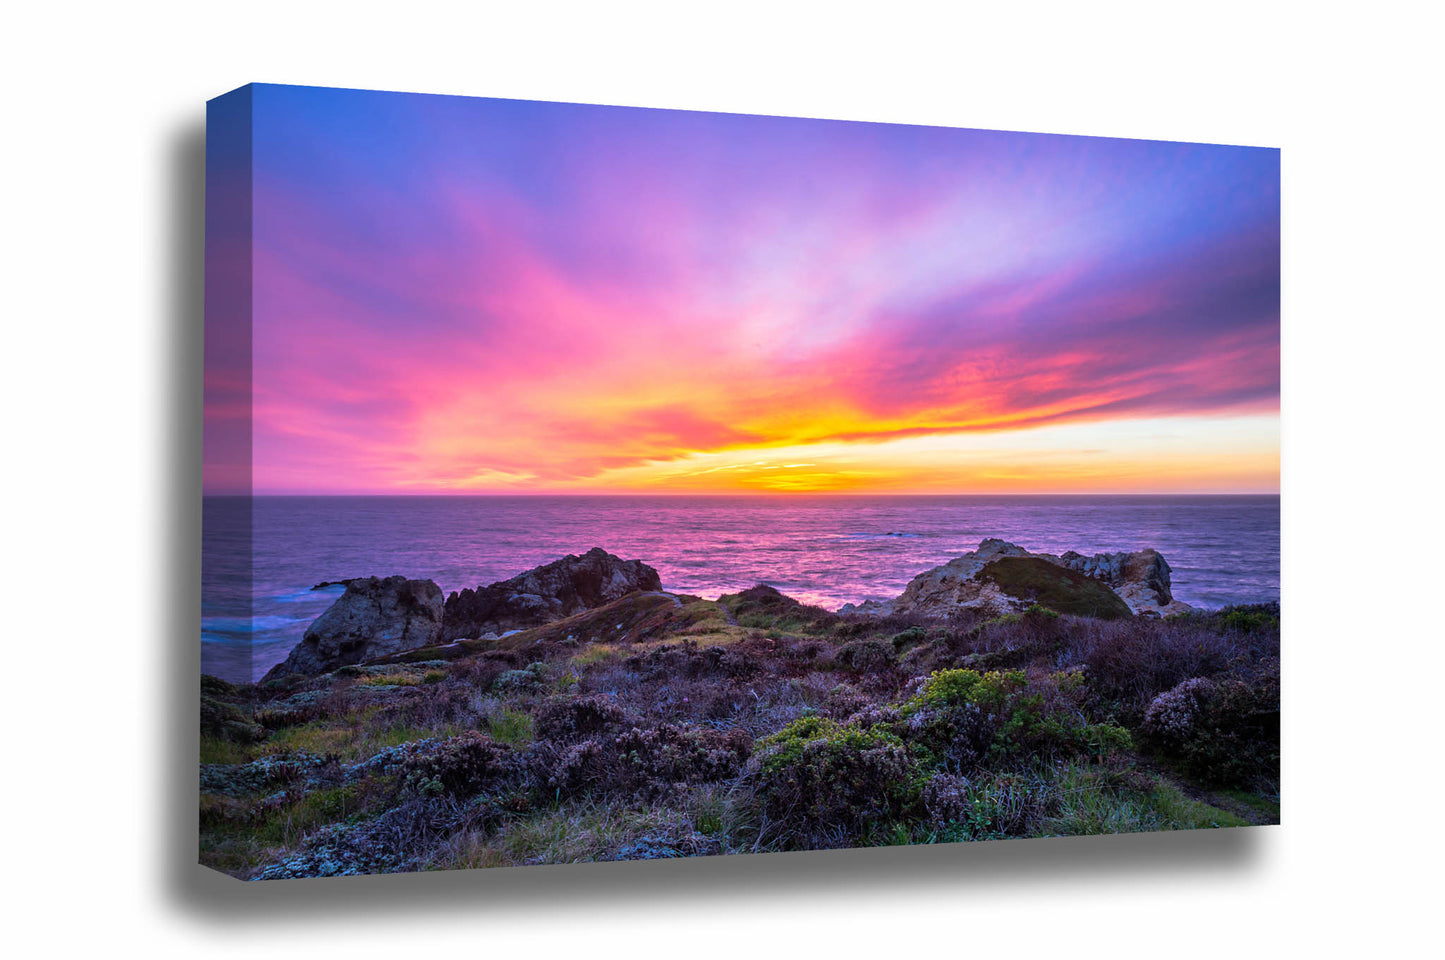 Coastal canvas wall art of a scenic sunset taking place over the Pacific Ocean along the Big Sur Coast in California by Sean Ramsey of Southern Plains Photography.